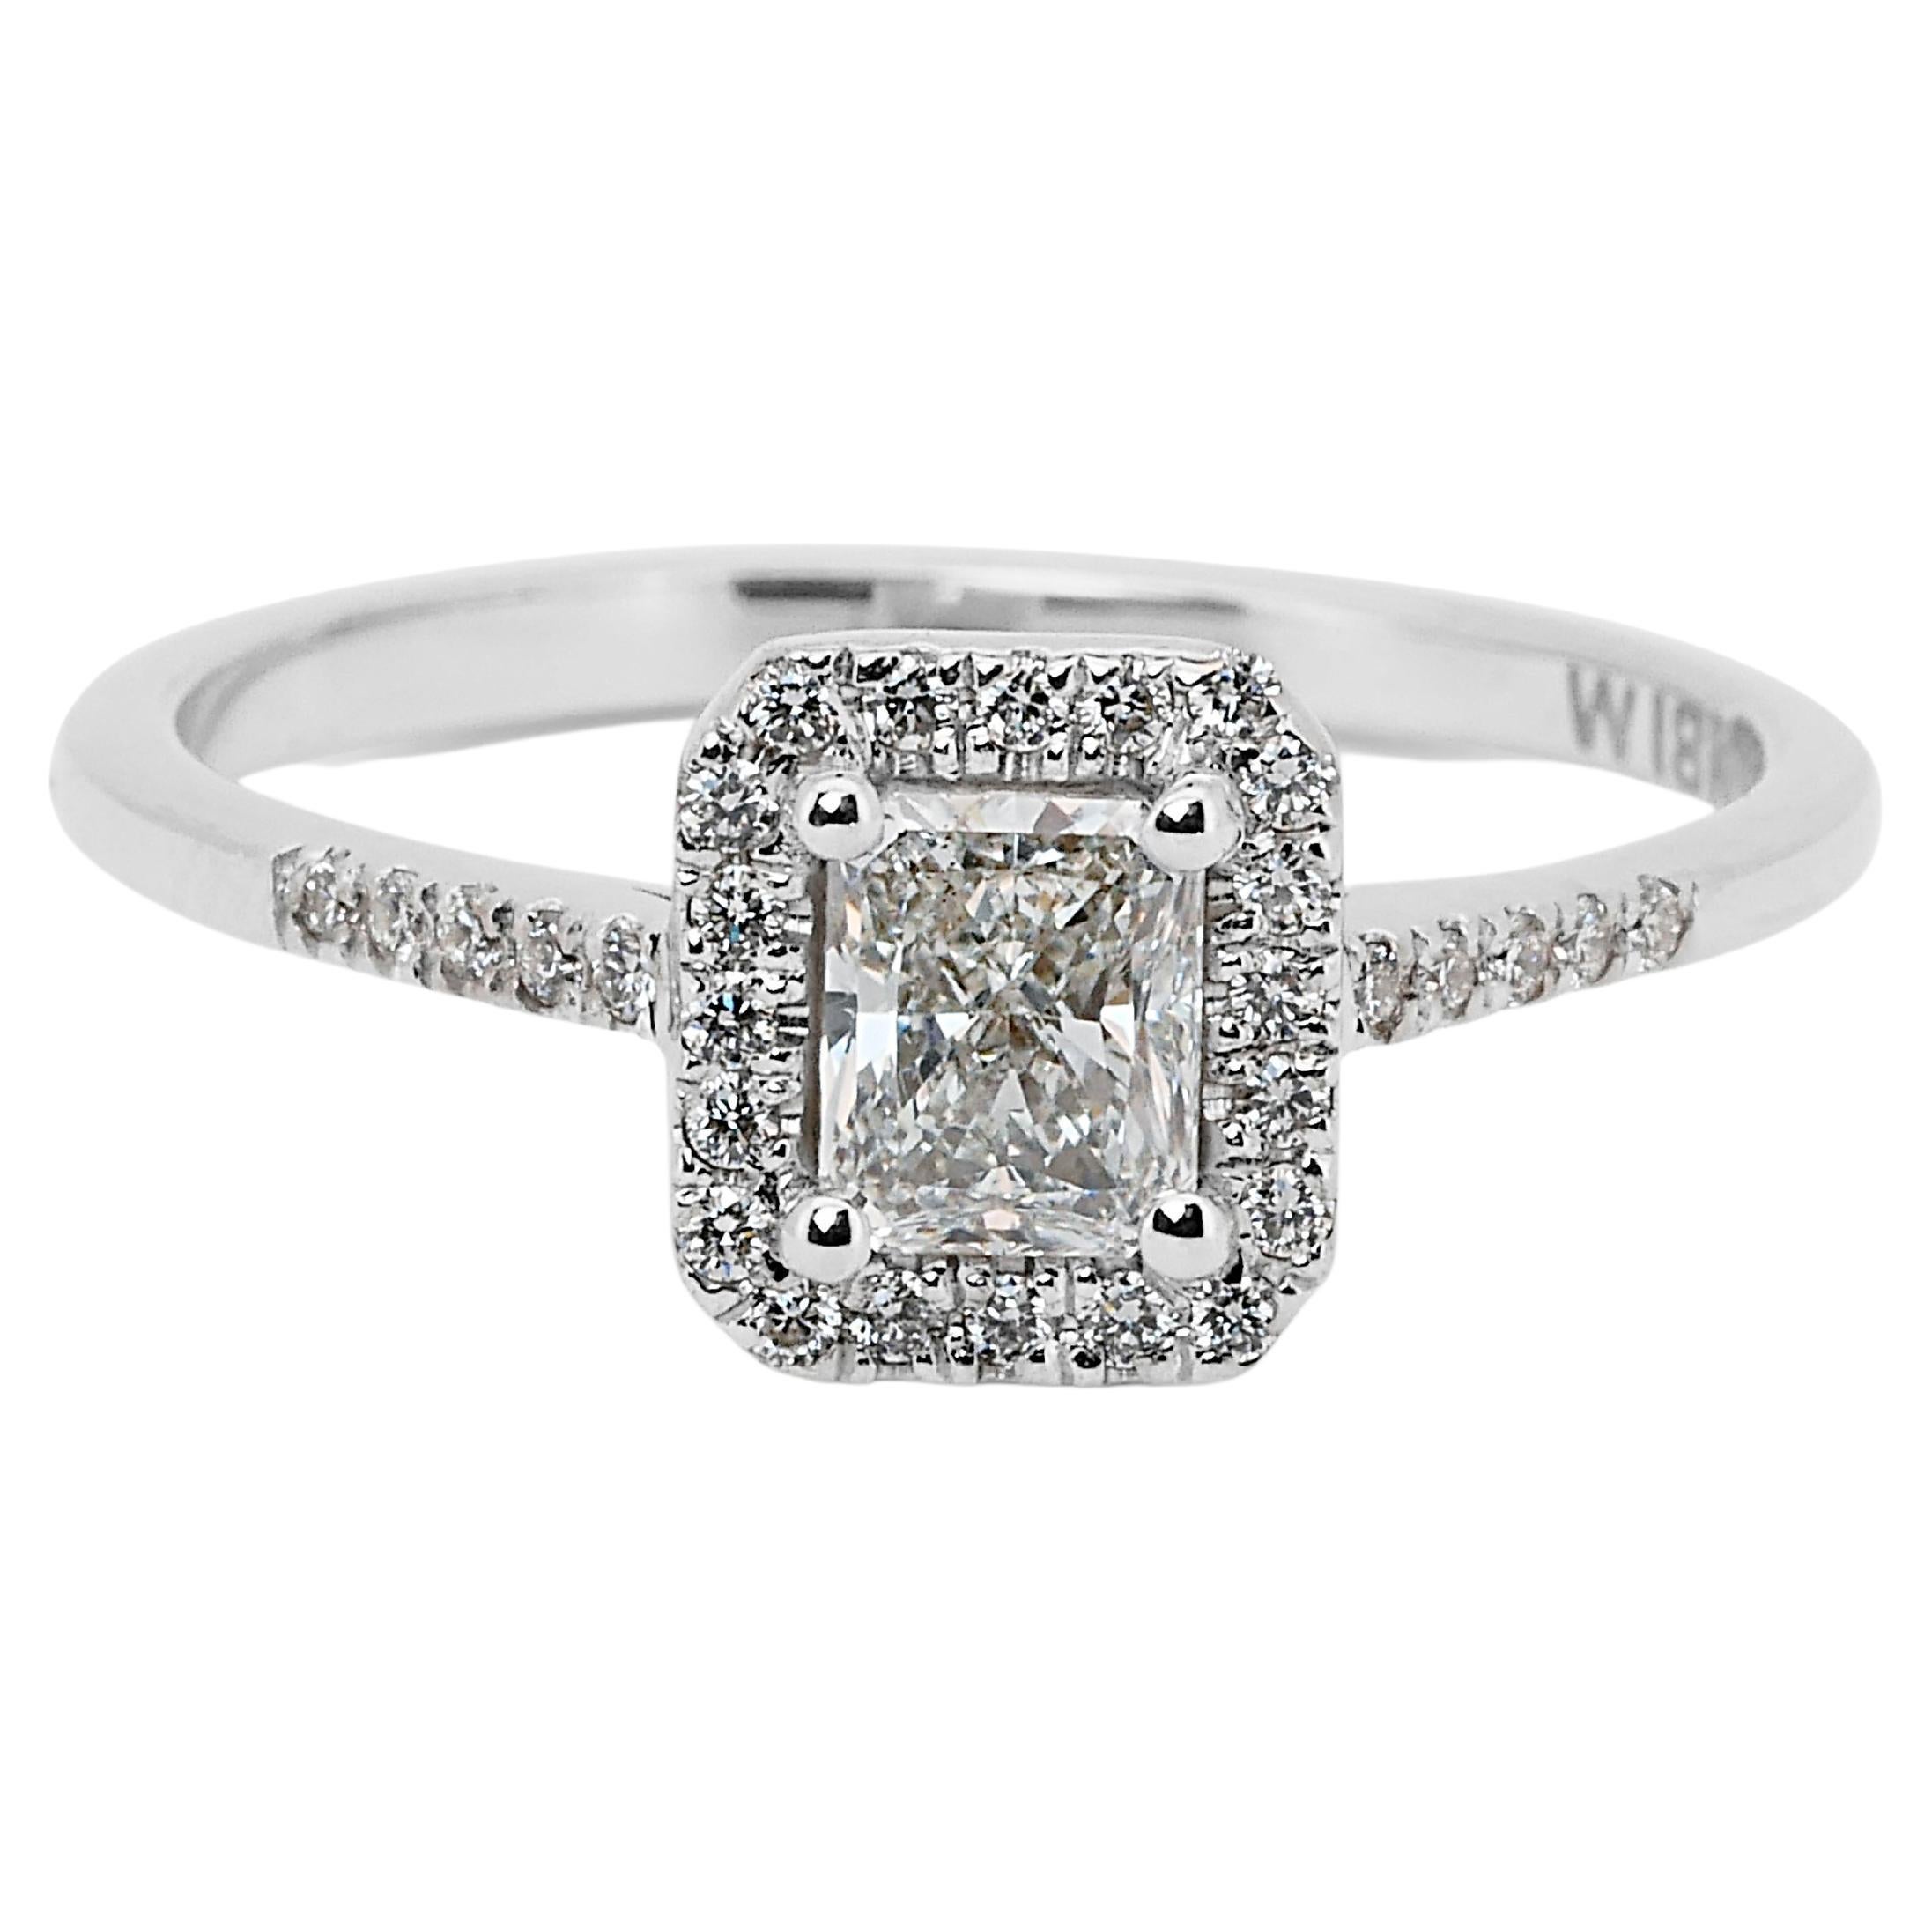 Stunning 18k White Gold Halo Ring with 0.63ct Natural Diamonds GIA Certificate